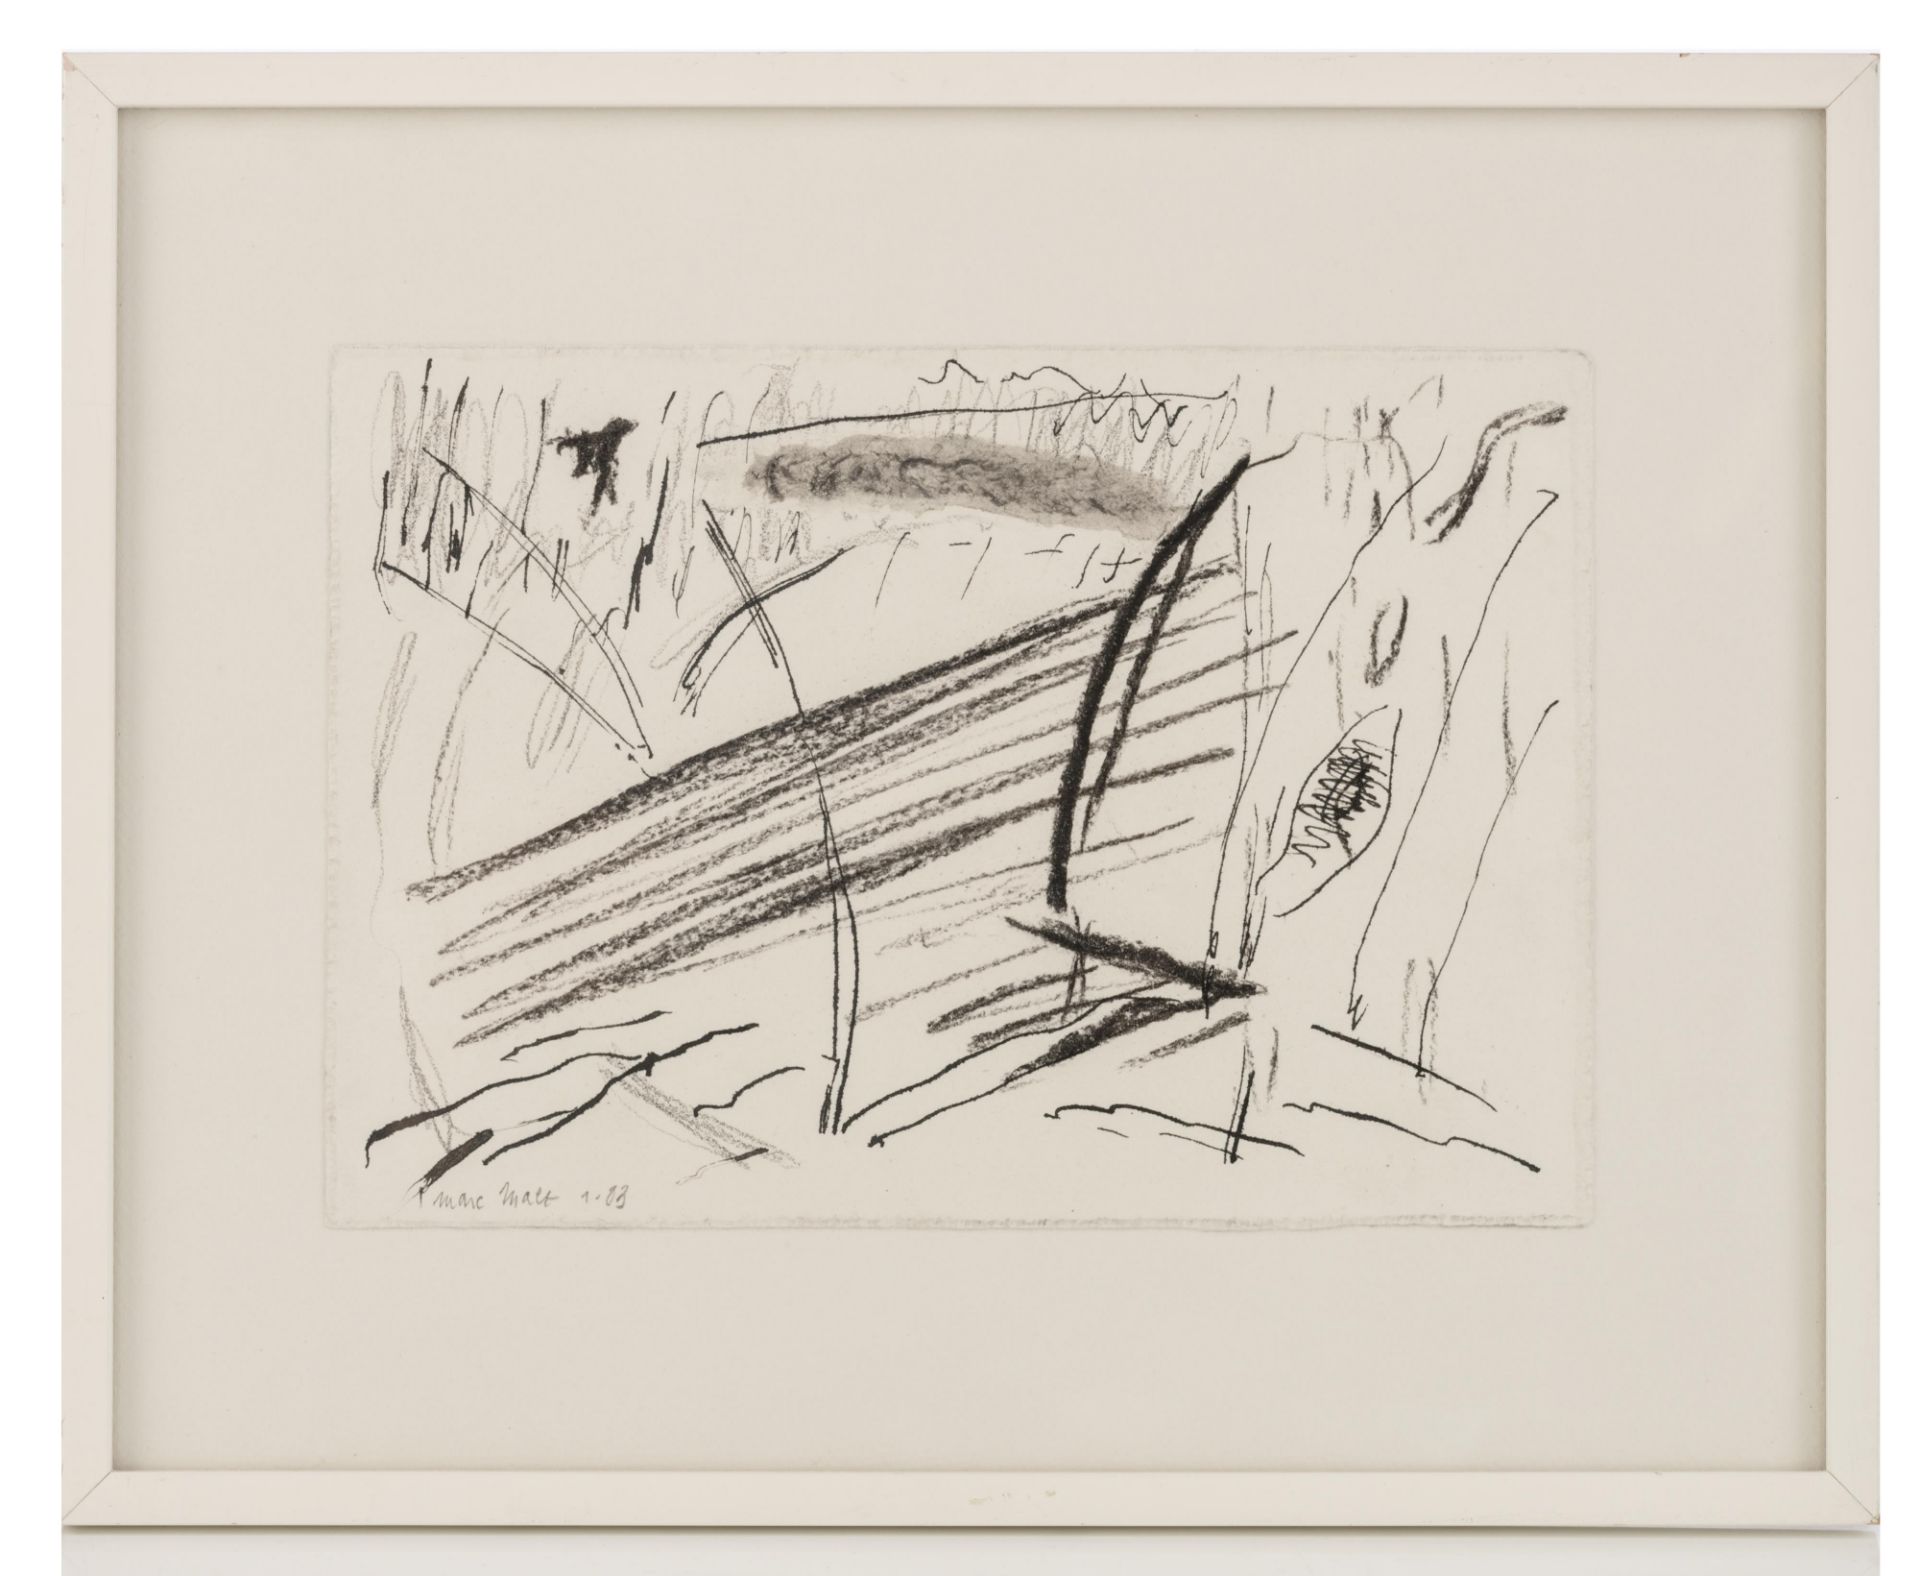 Marc Maet (1955-2000), 'In 't bos', 1983, 17,5 x 25 cm - Image 2 of 5